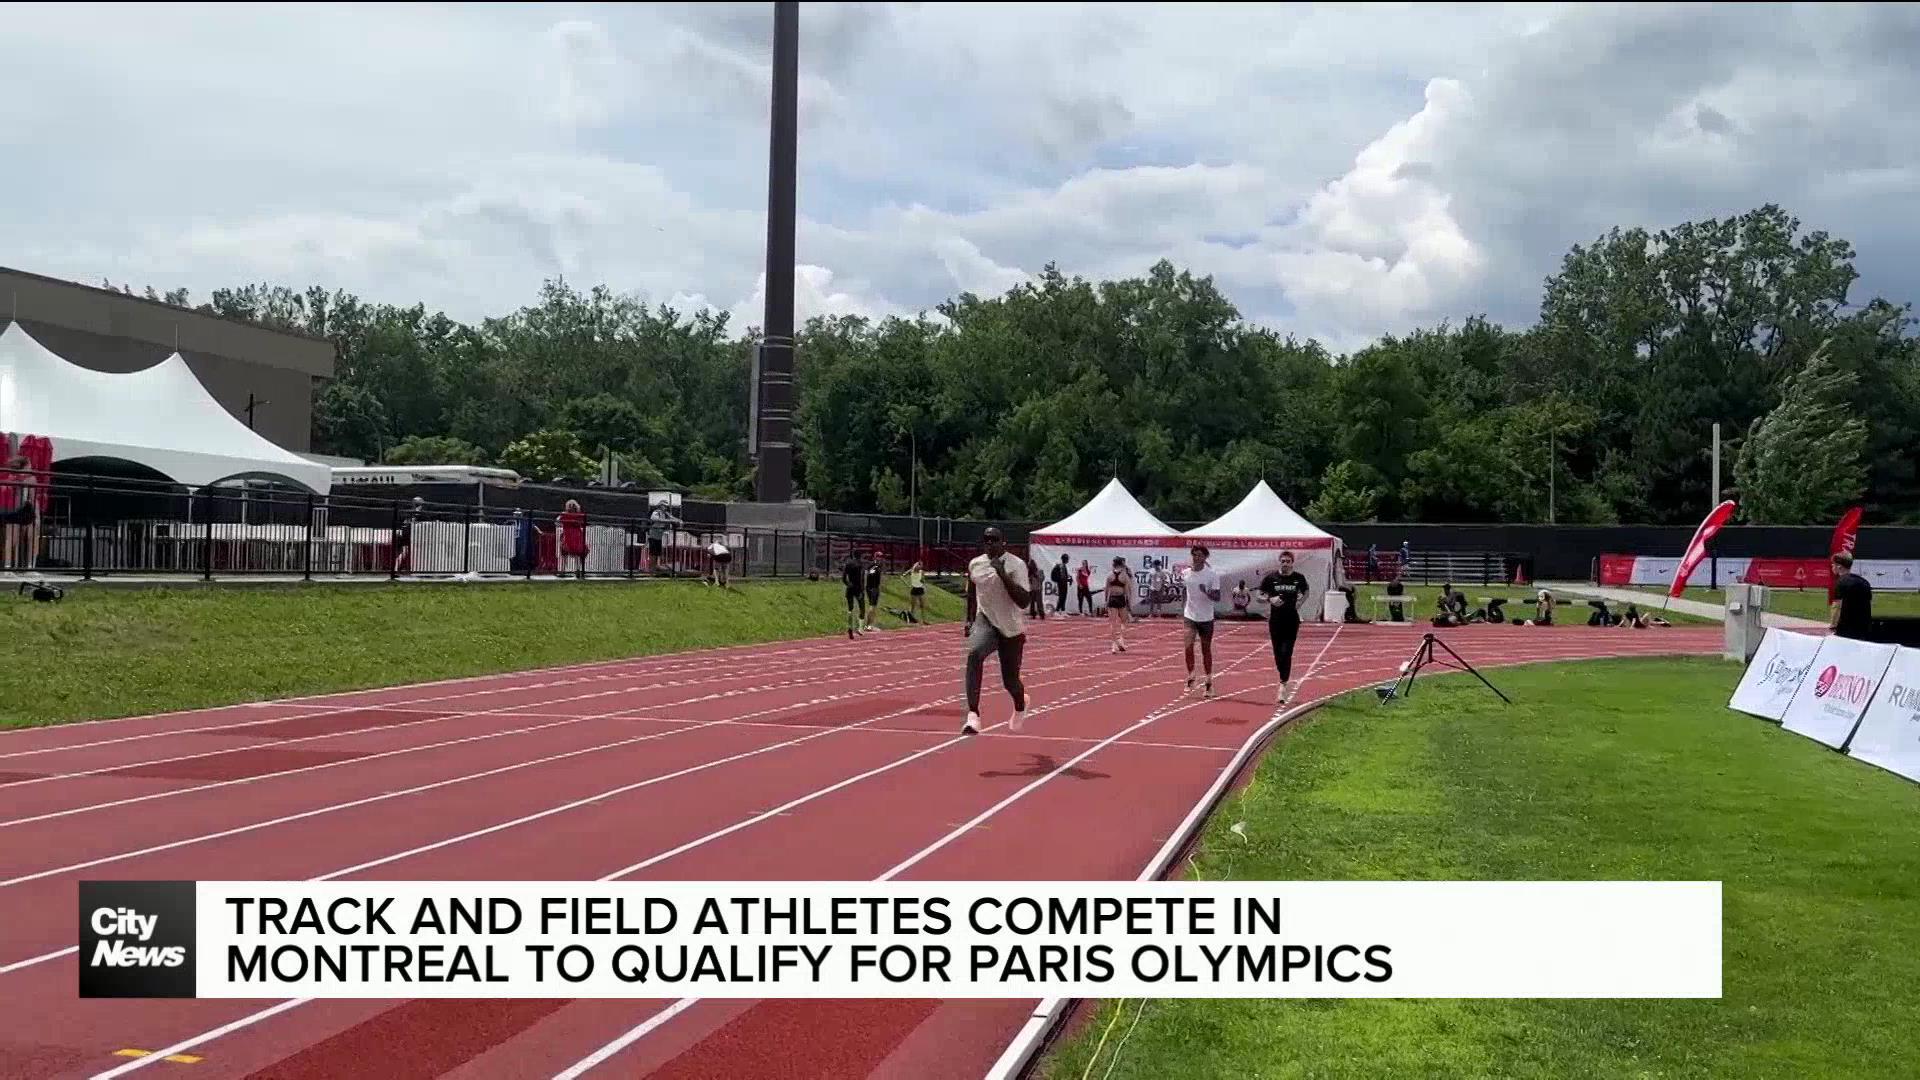 Track and field athletes hope to qualify for Paris Olympics